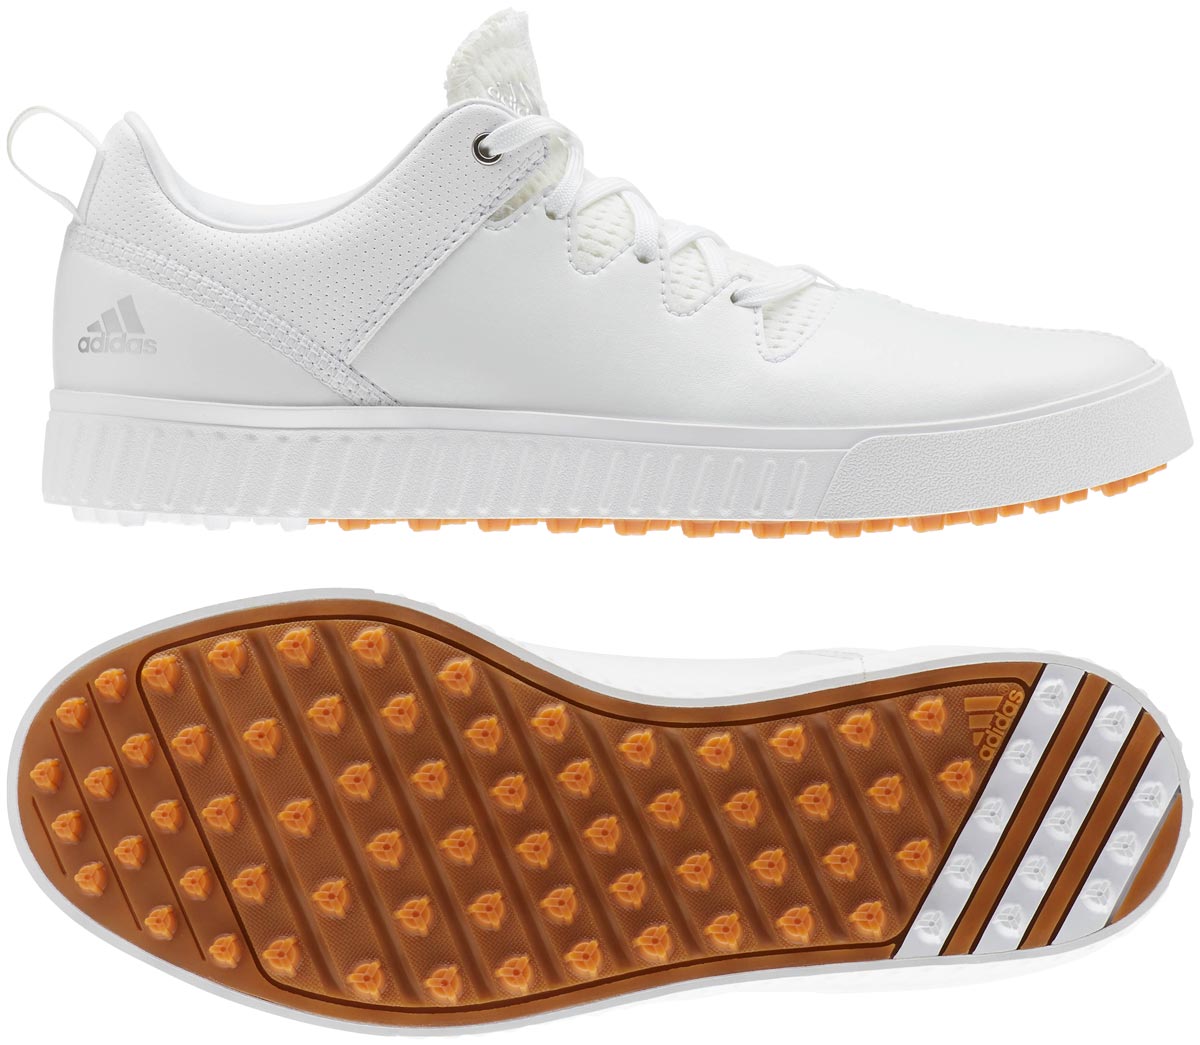 adidas ppf golf shoes review